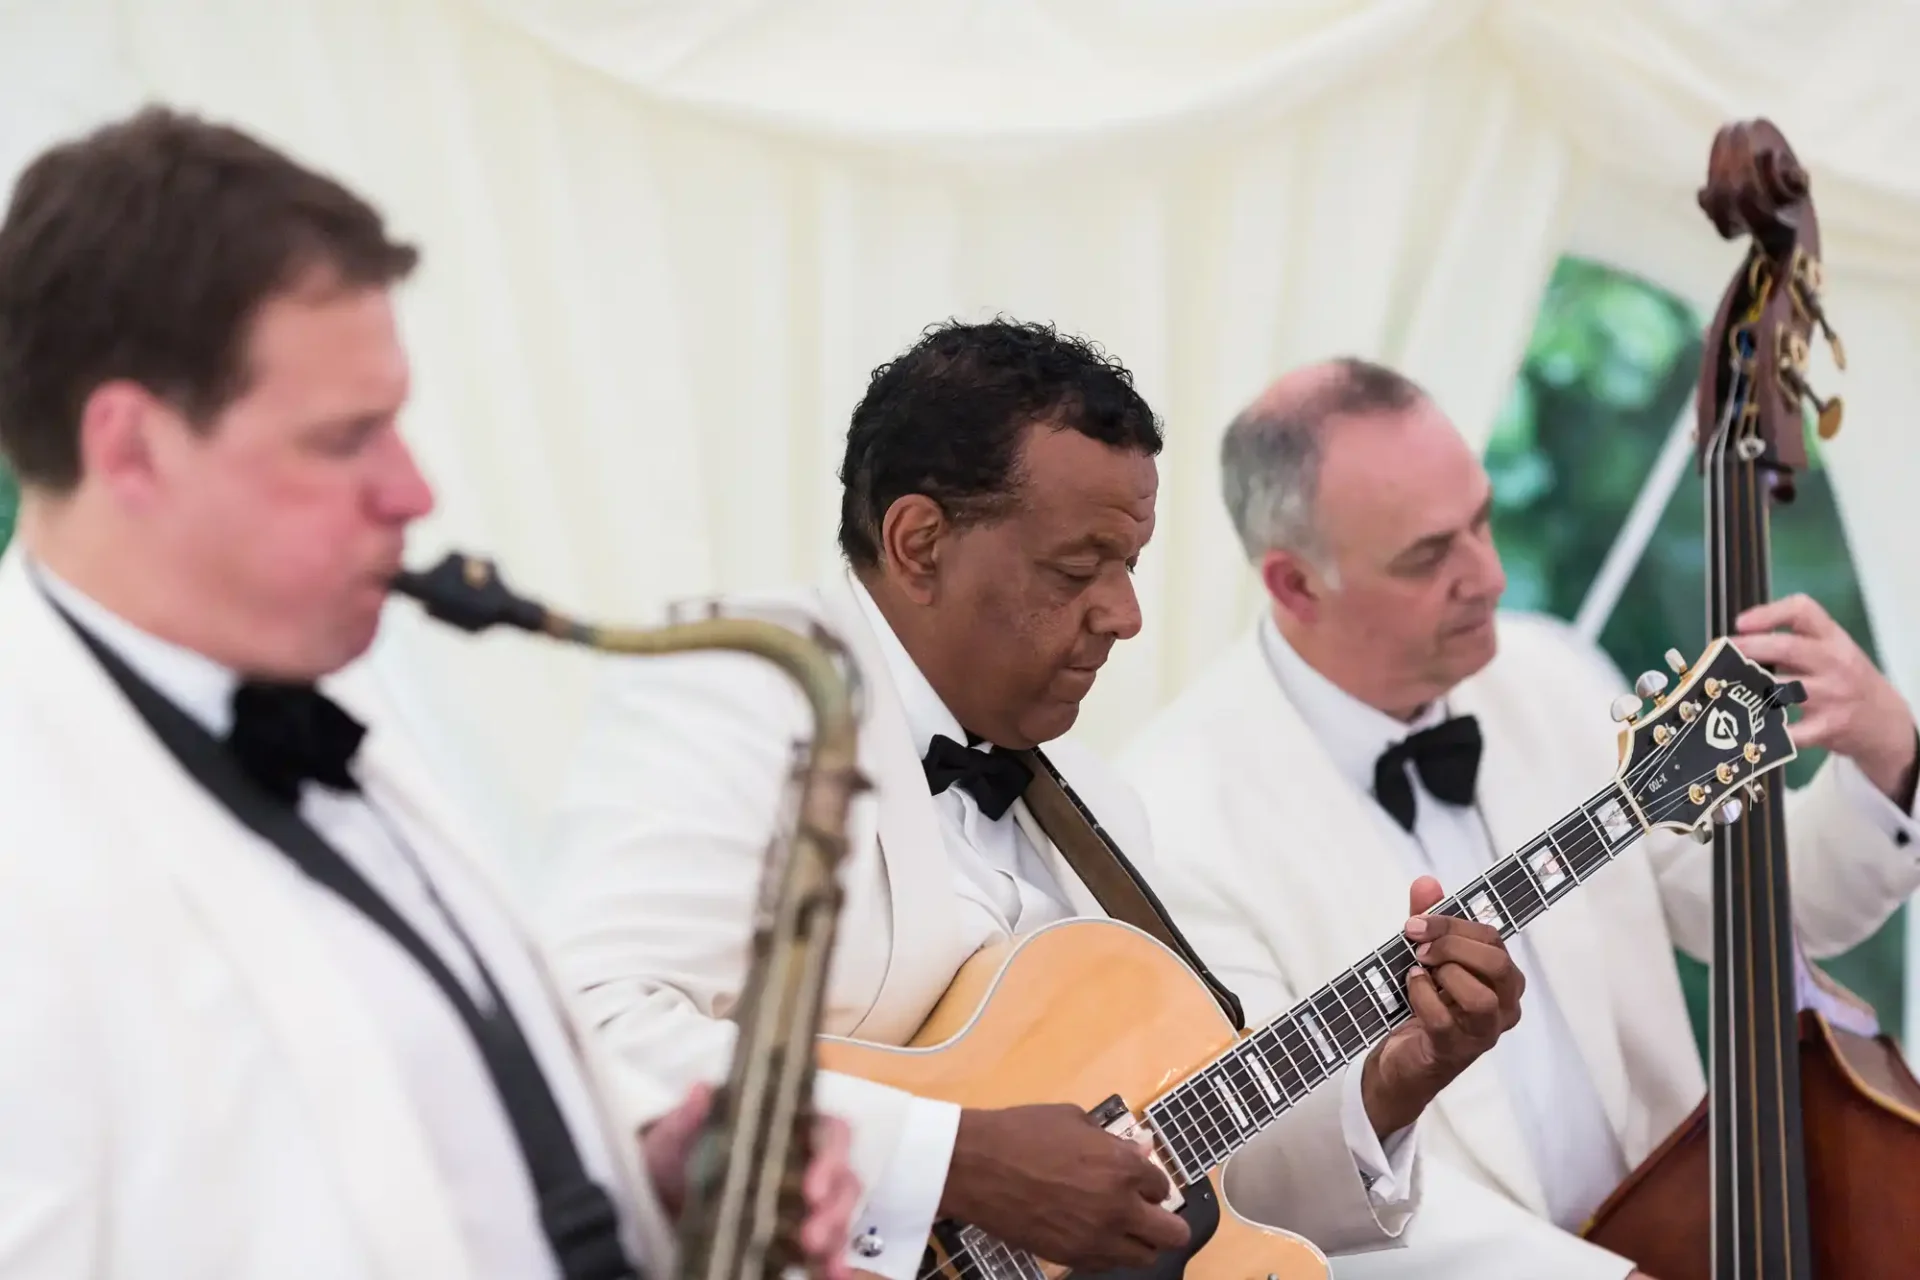 Three musicians in tuxedos playing saxophone, guitar, and double bass at an event inside a marquee tent.